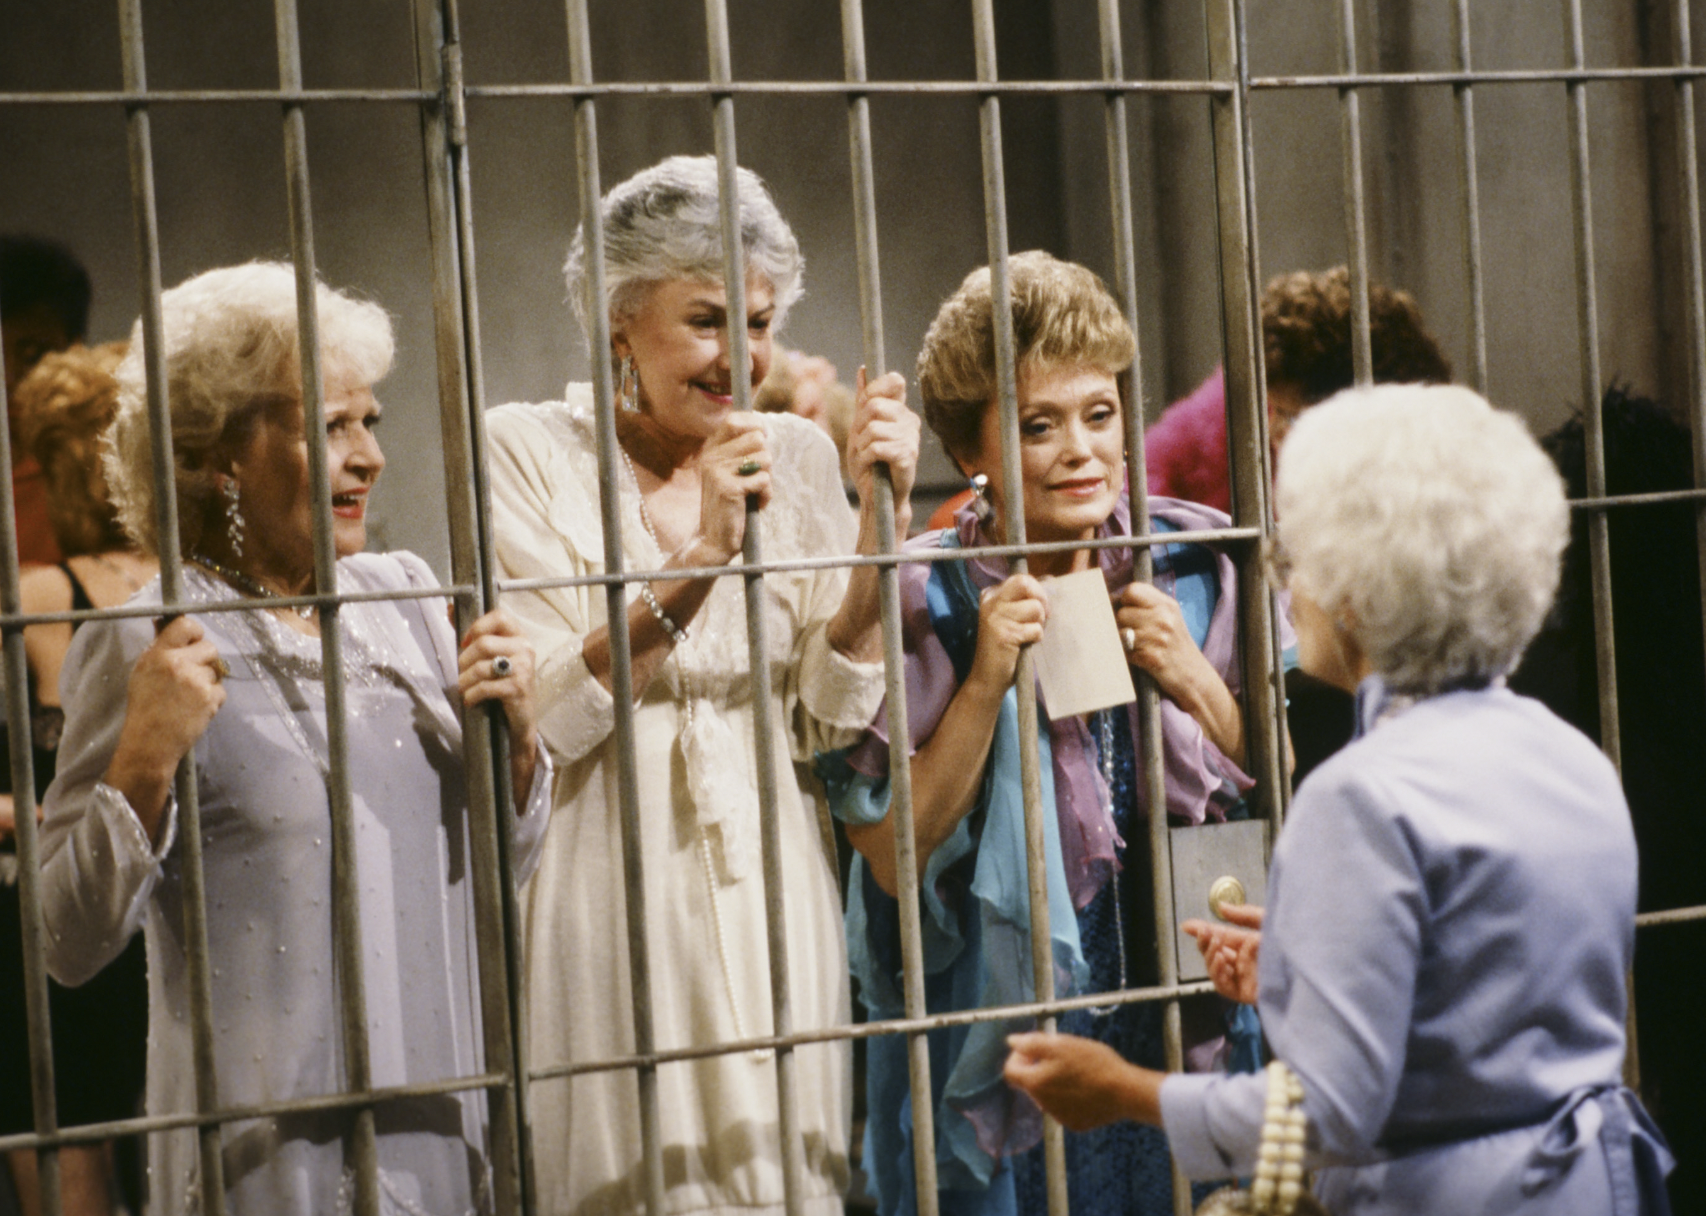 Estelle Getty, Rue McClanahan, Bea Arthur, and Betty White in "The Golden Girls"